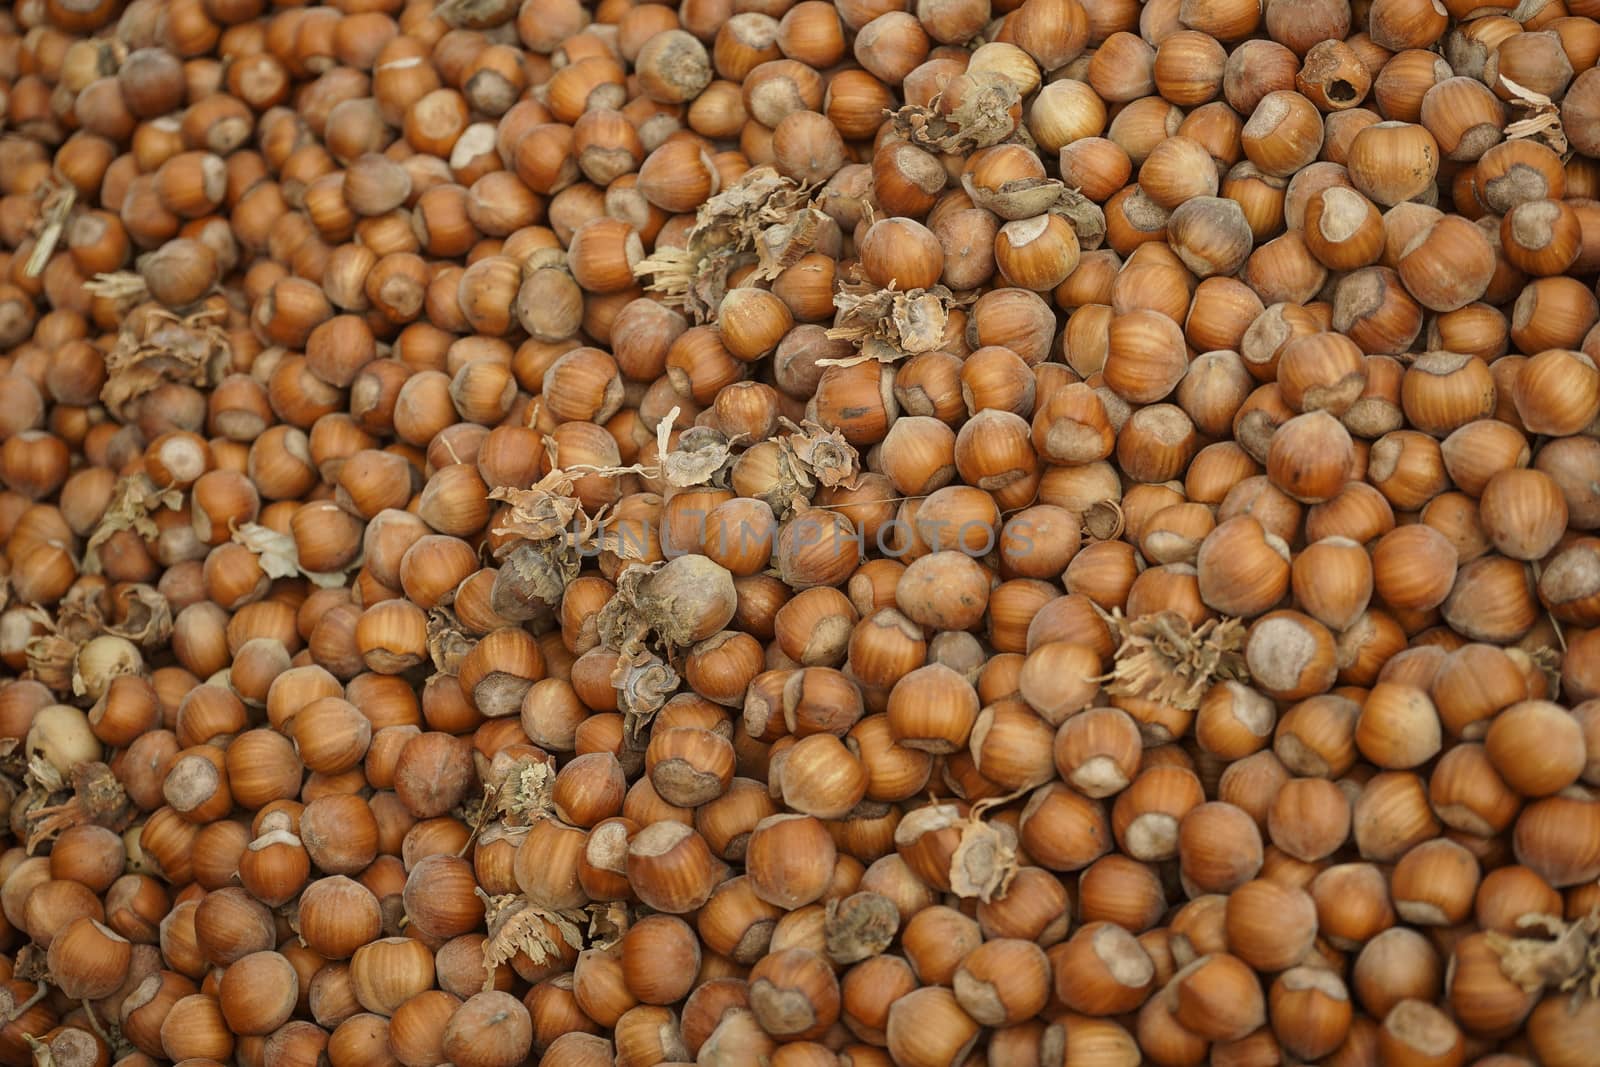 Freshly just picked hazelnuts by cosca